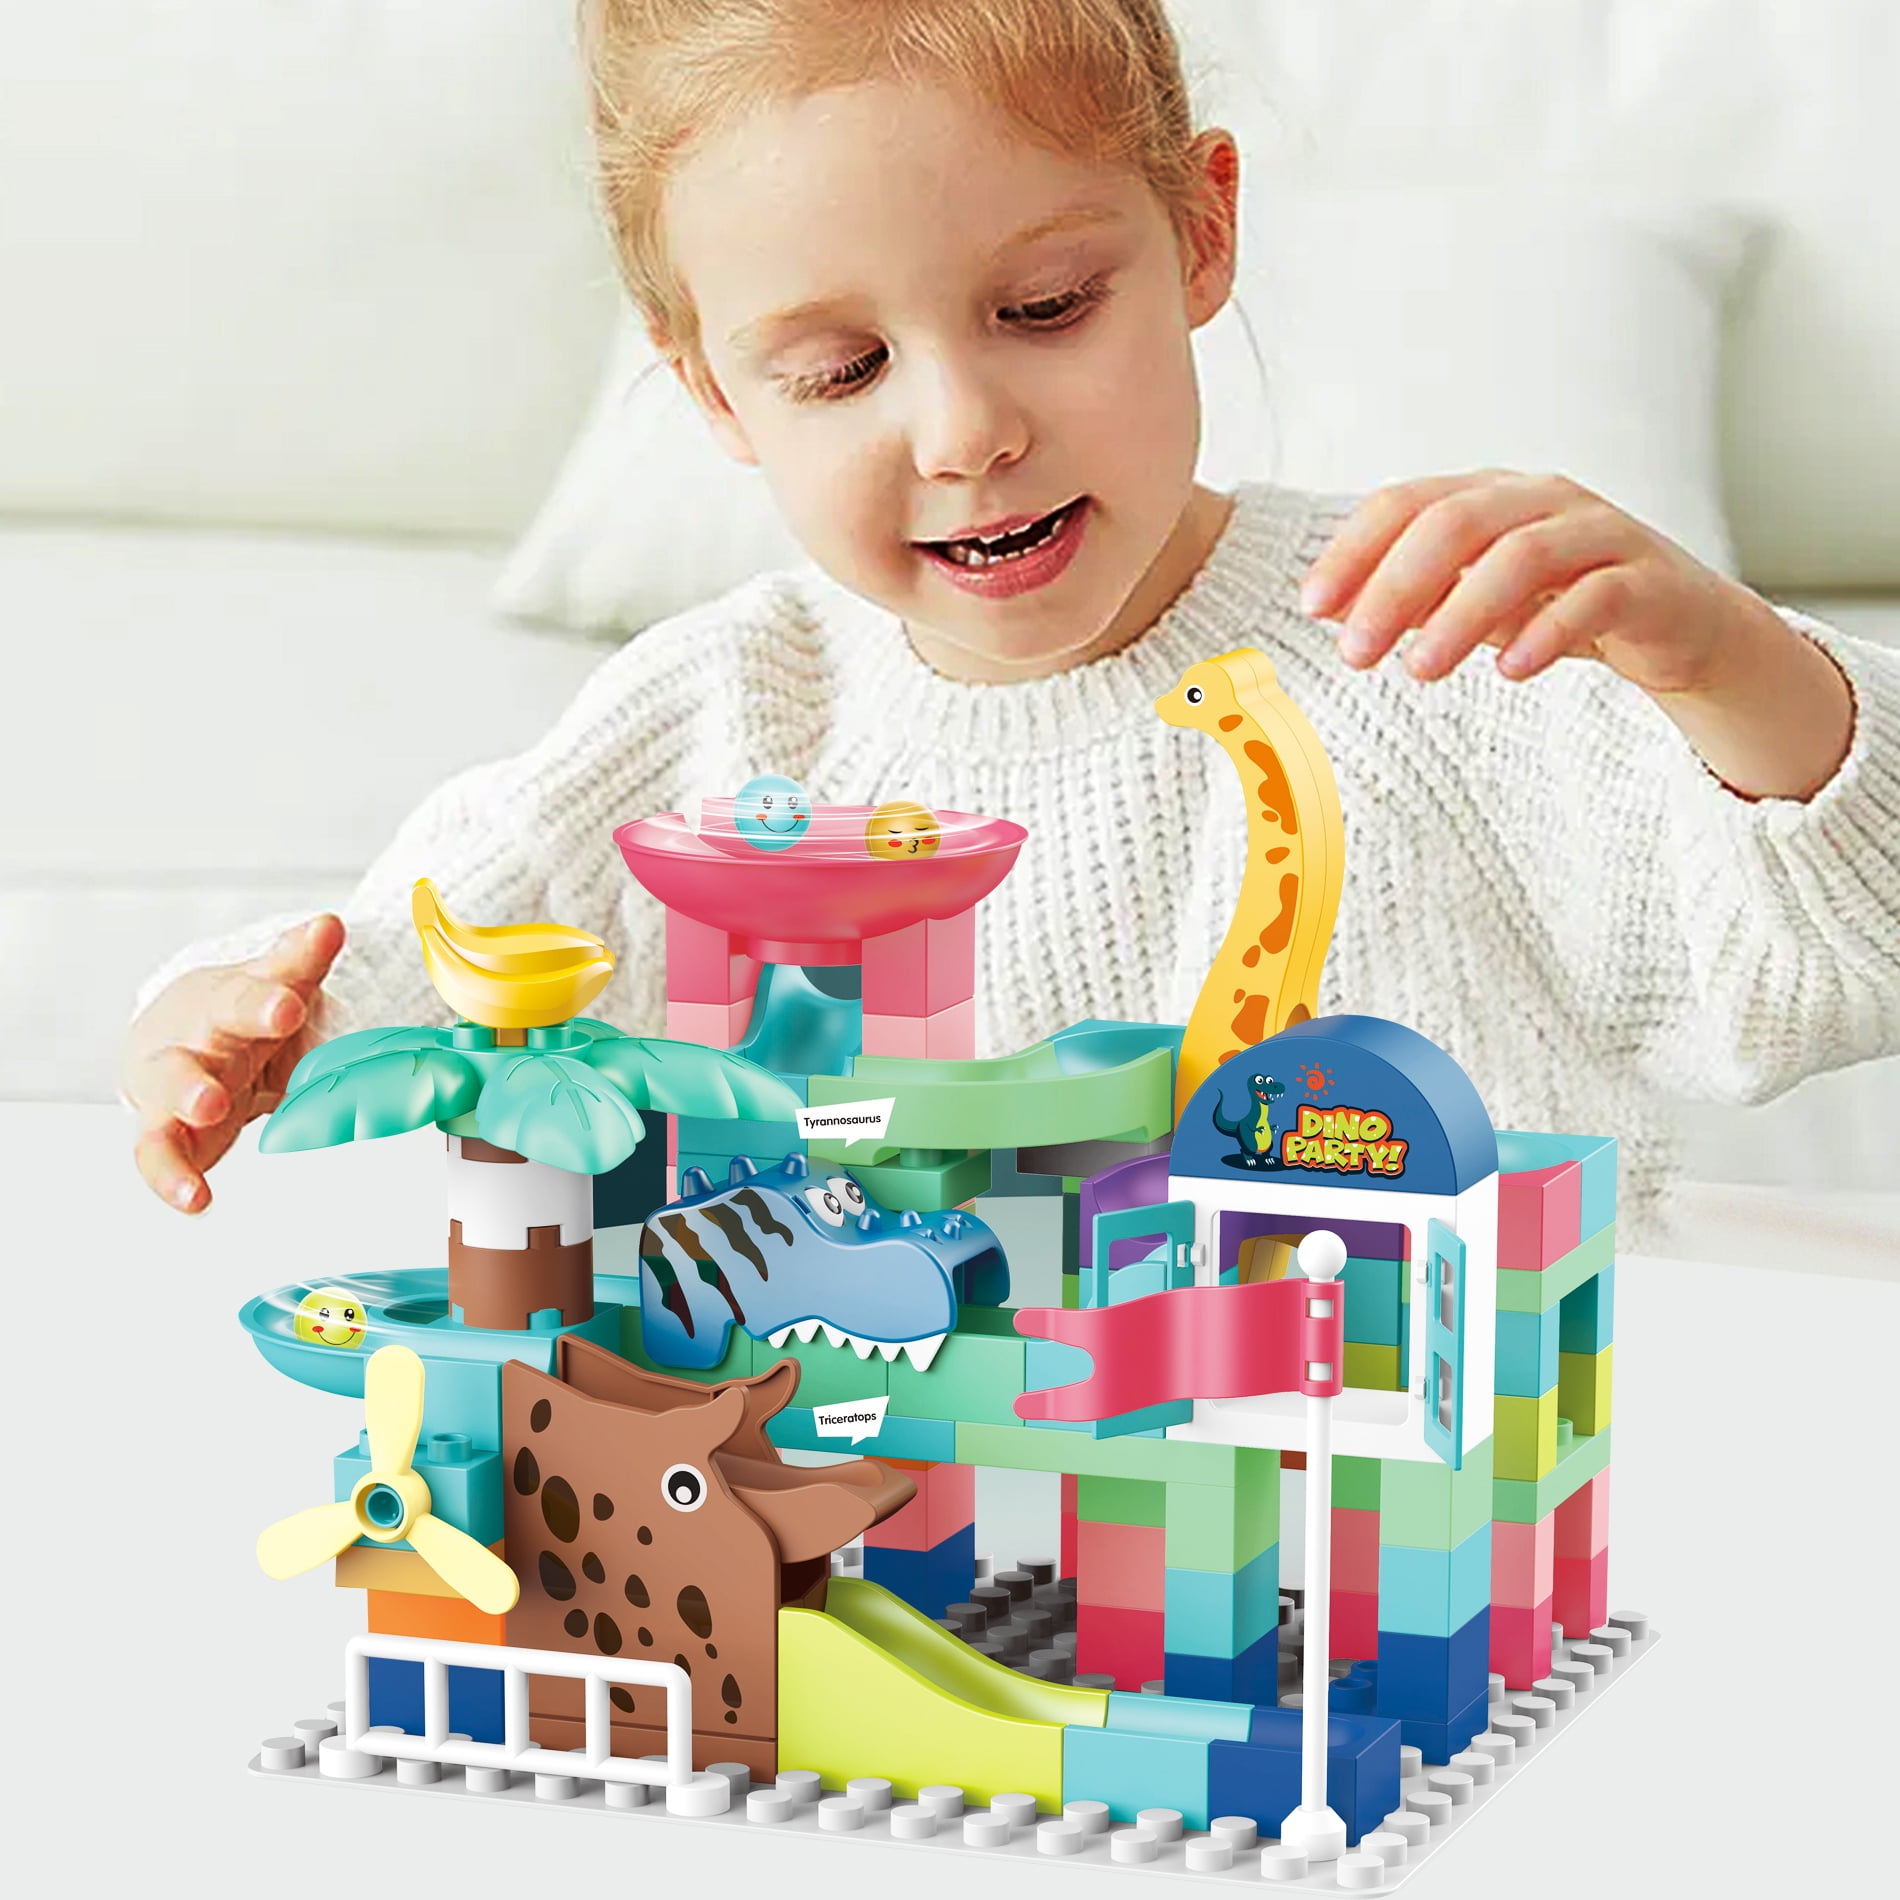  Kid Marble Run Building Blocks Dinosaur, Montessori Learning  STEM Toy Bricks Maze Puzzle Set Race Track Compatible with Major Brands for  Age 3 4 5 6 7 8+ Boys Girls Gift 67PCS : Toys & Games